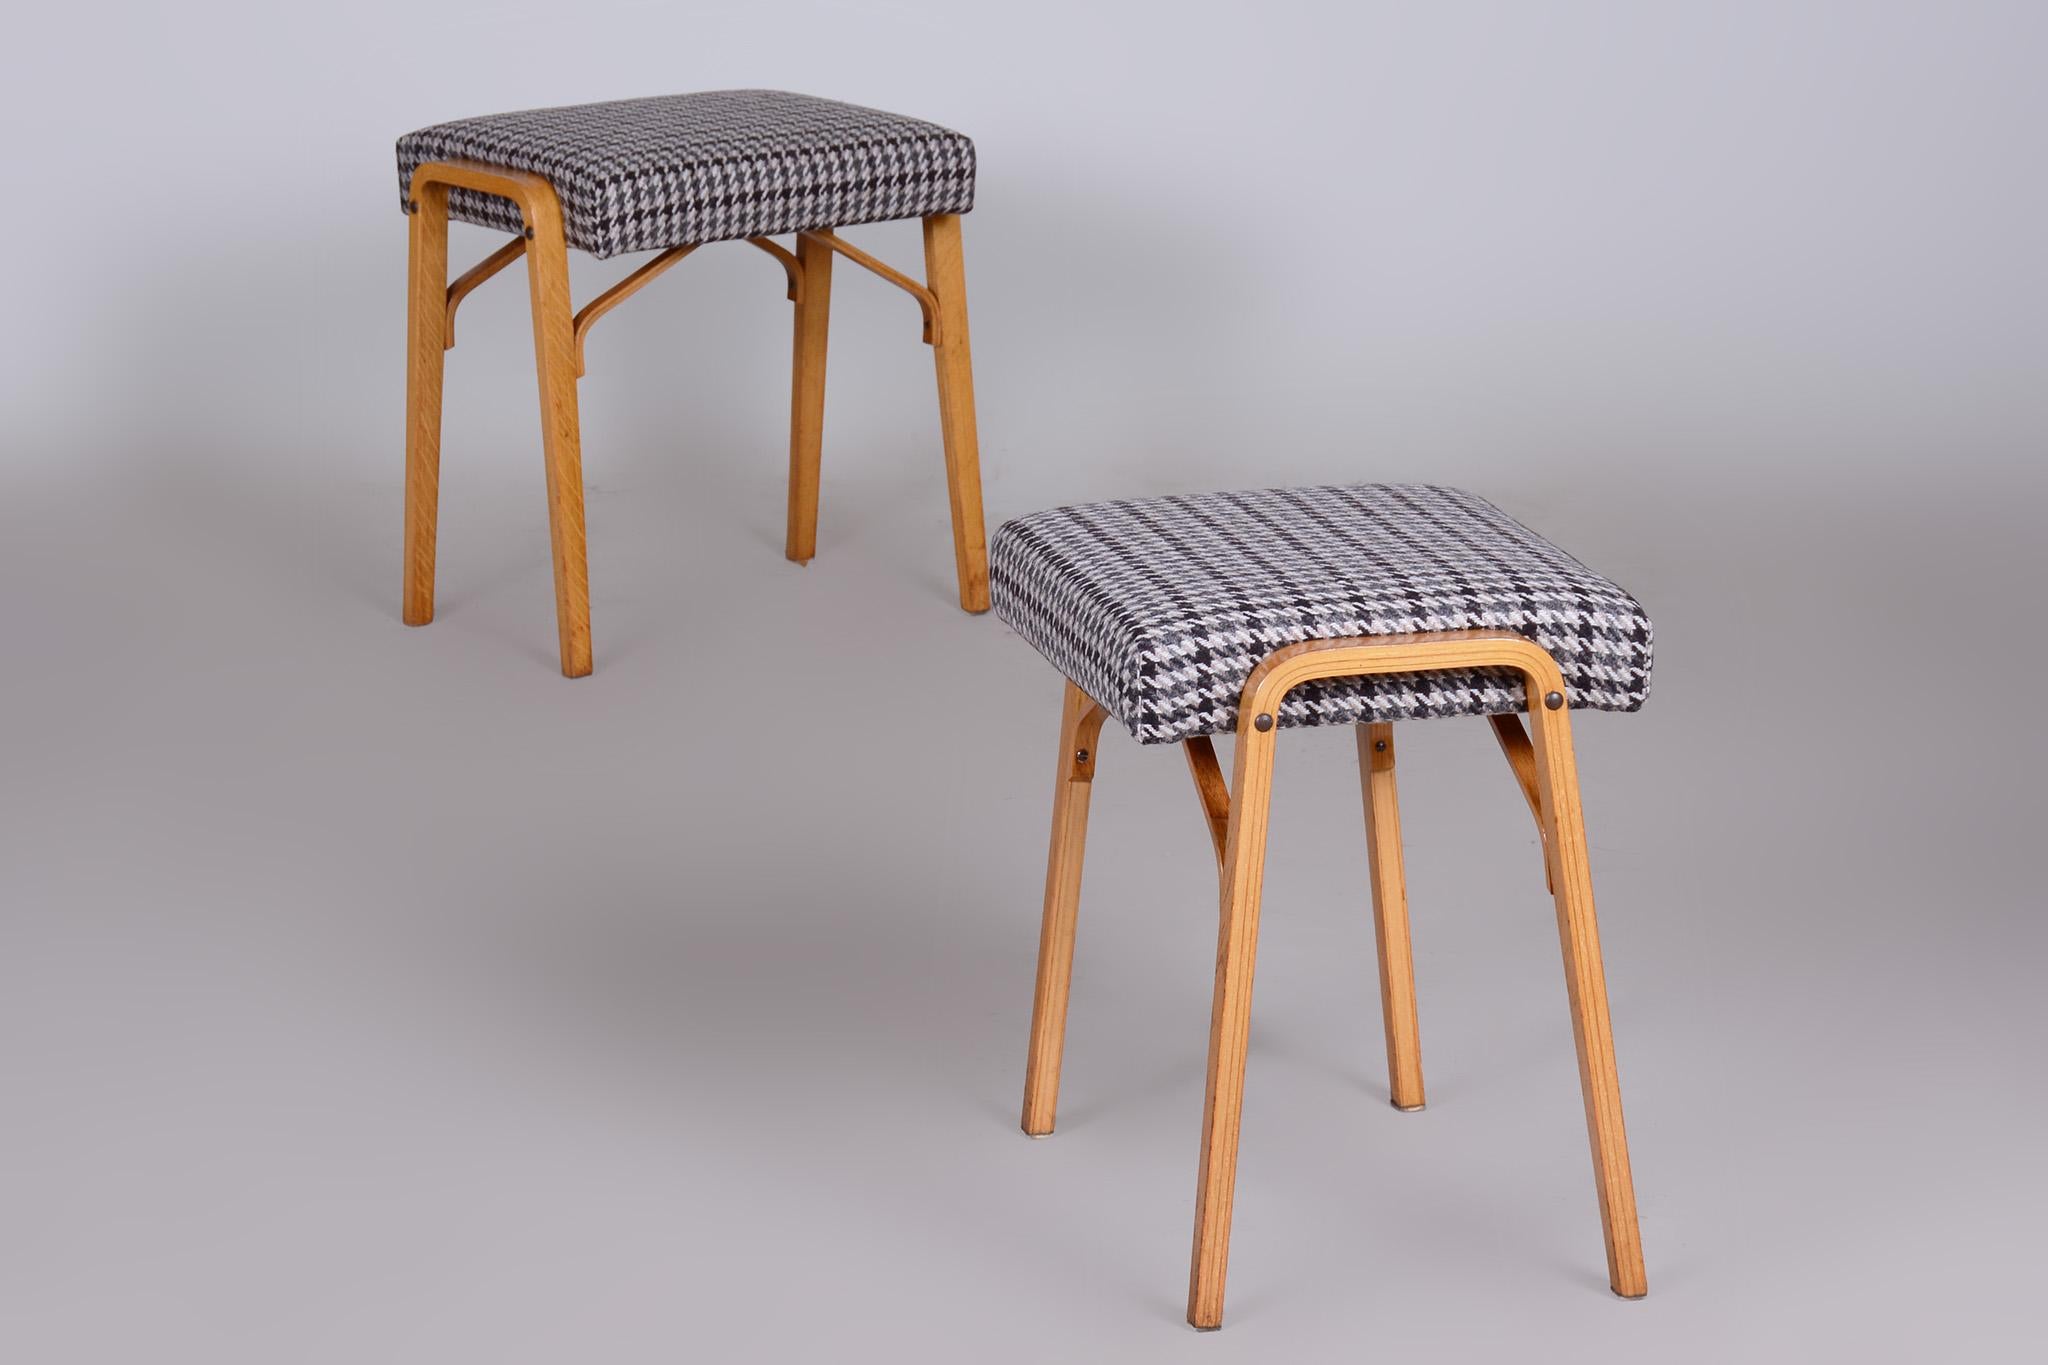 Fabric Pair of Midcentury Beech Stools by Ludvik Volak, Czechia, 1950s For Sale